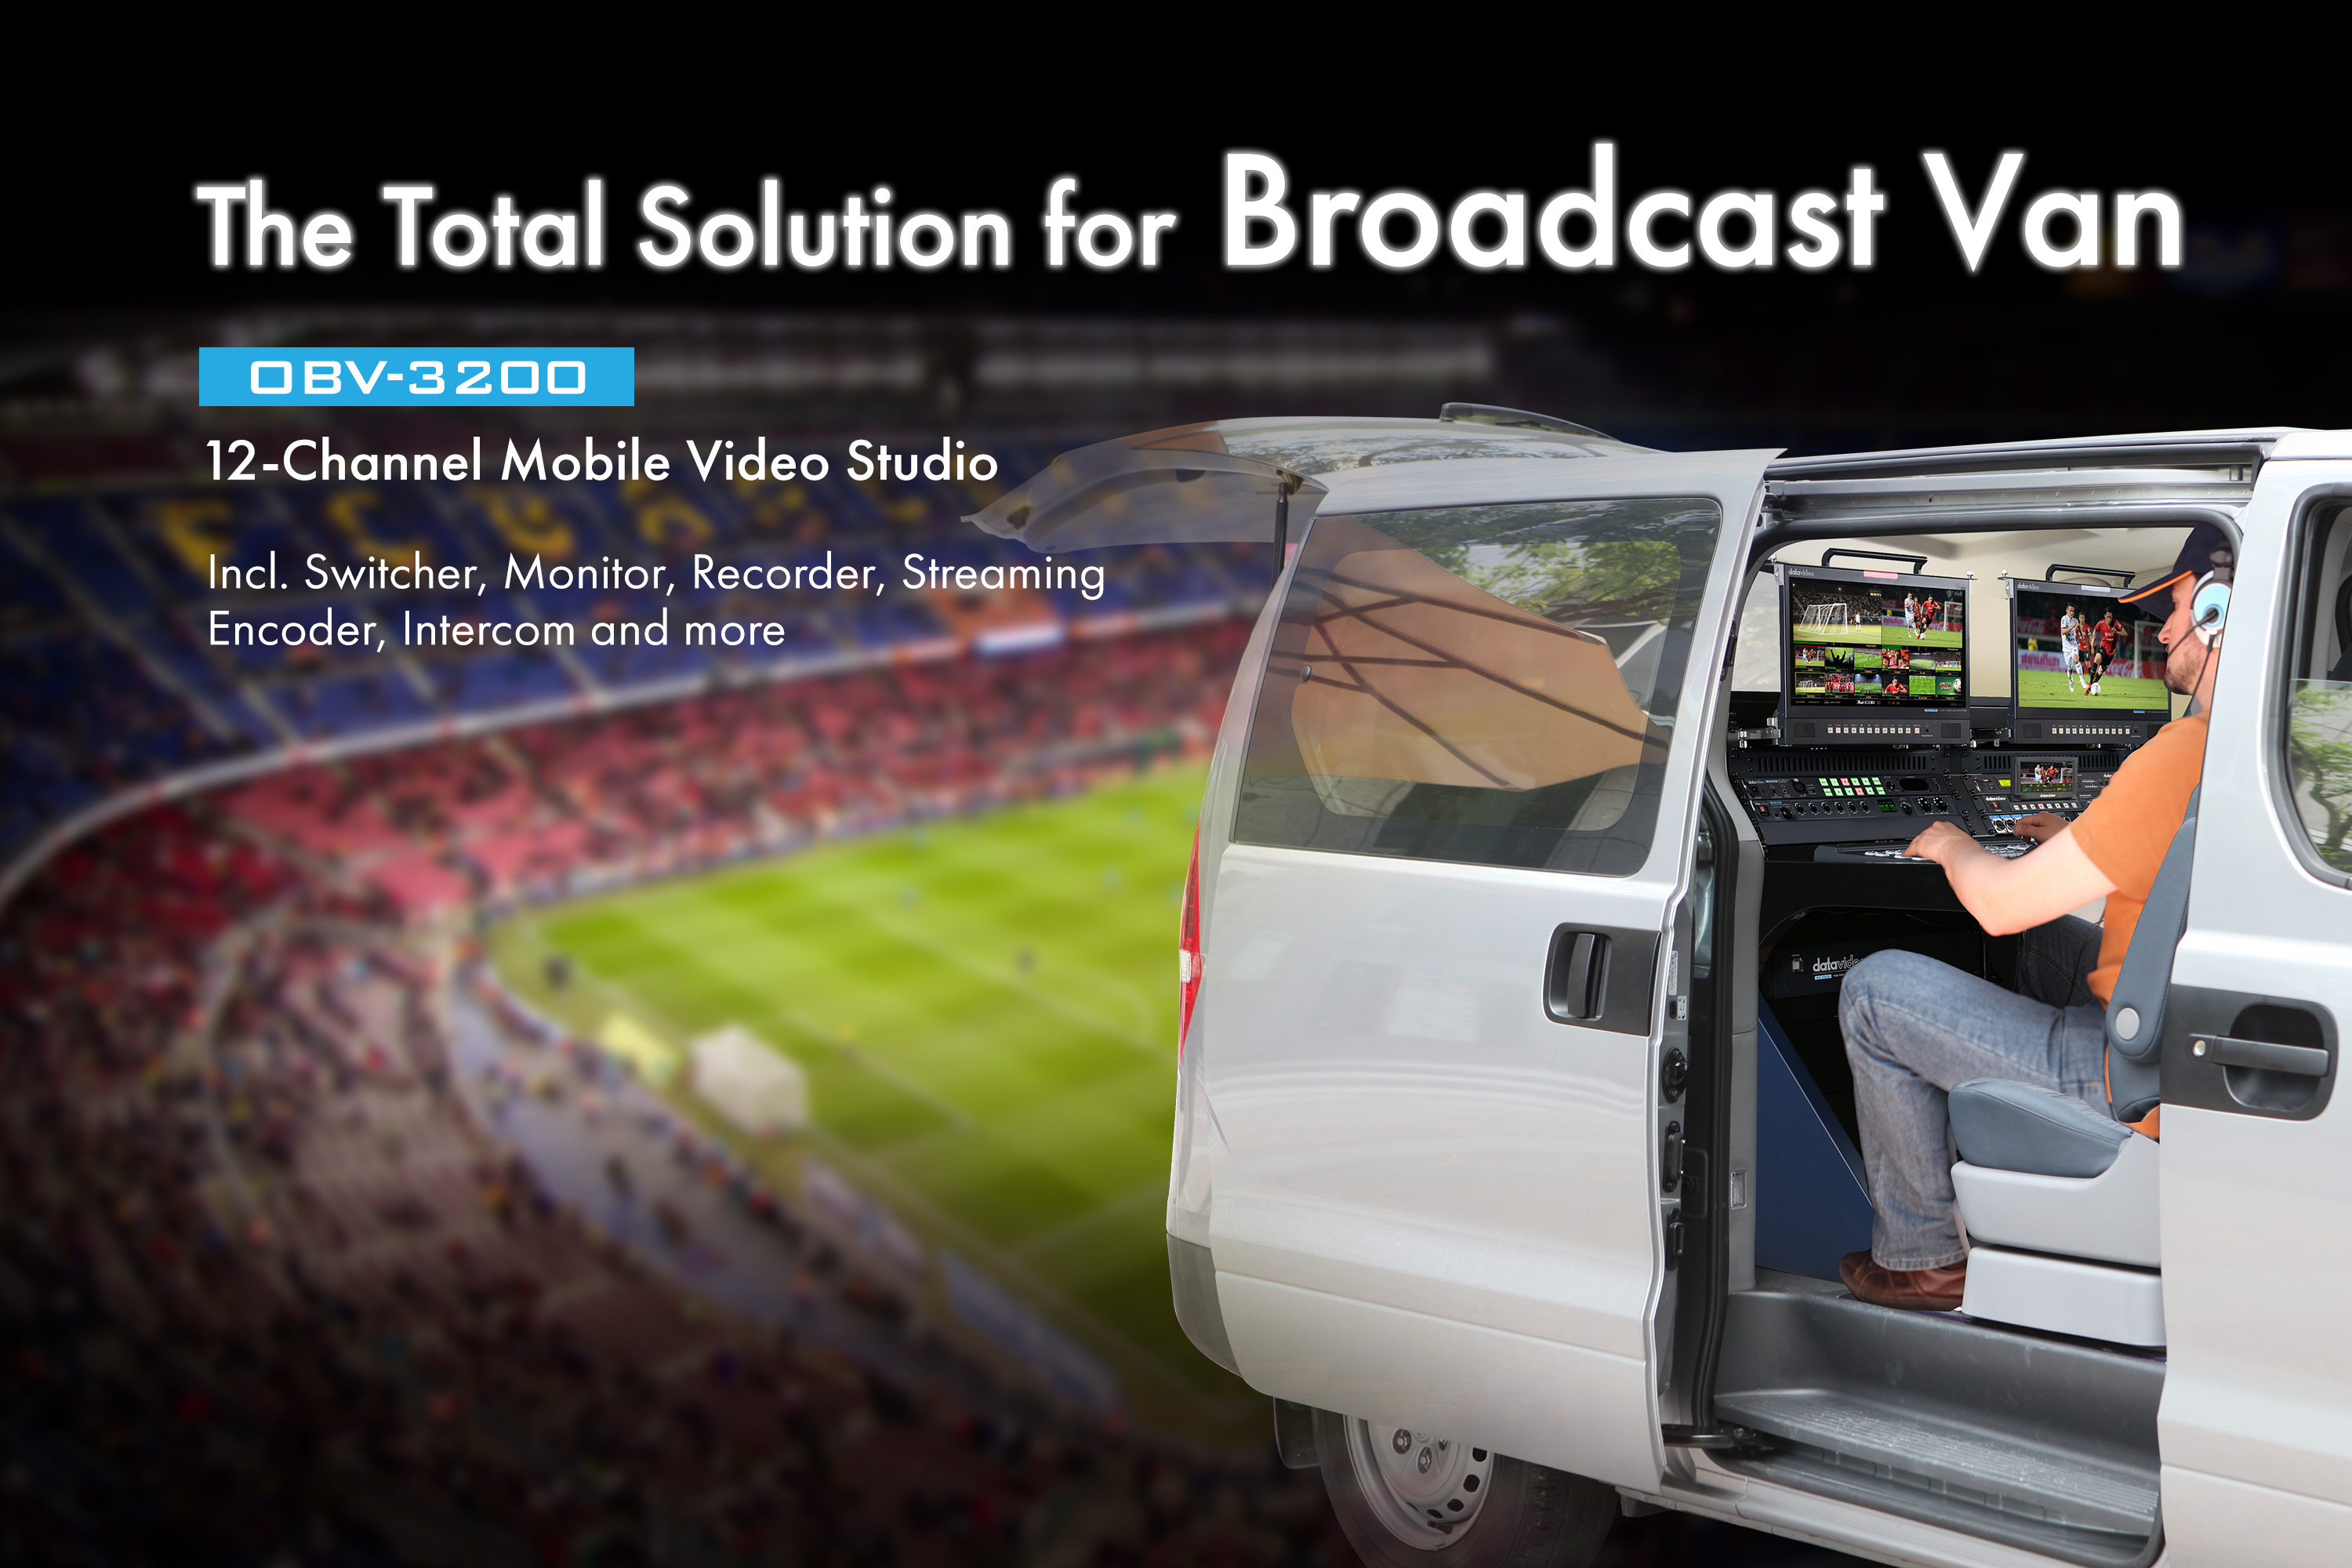 Datavideo OBV-3200 Mobile Video Studio for Outdoor Broadcasting is Available